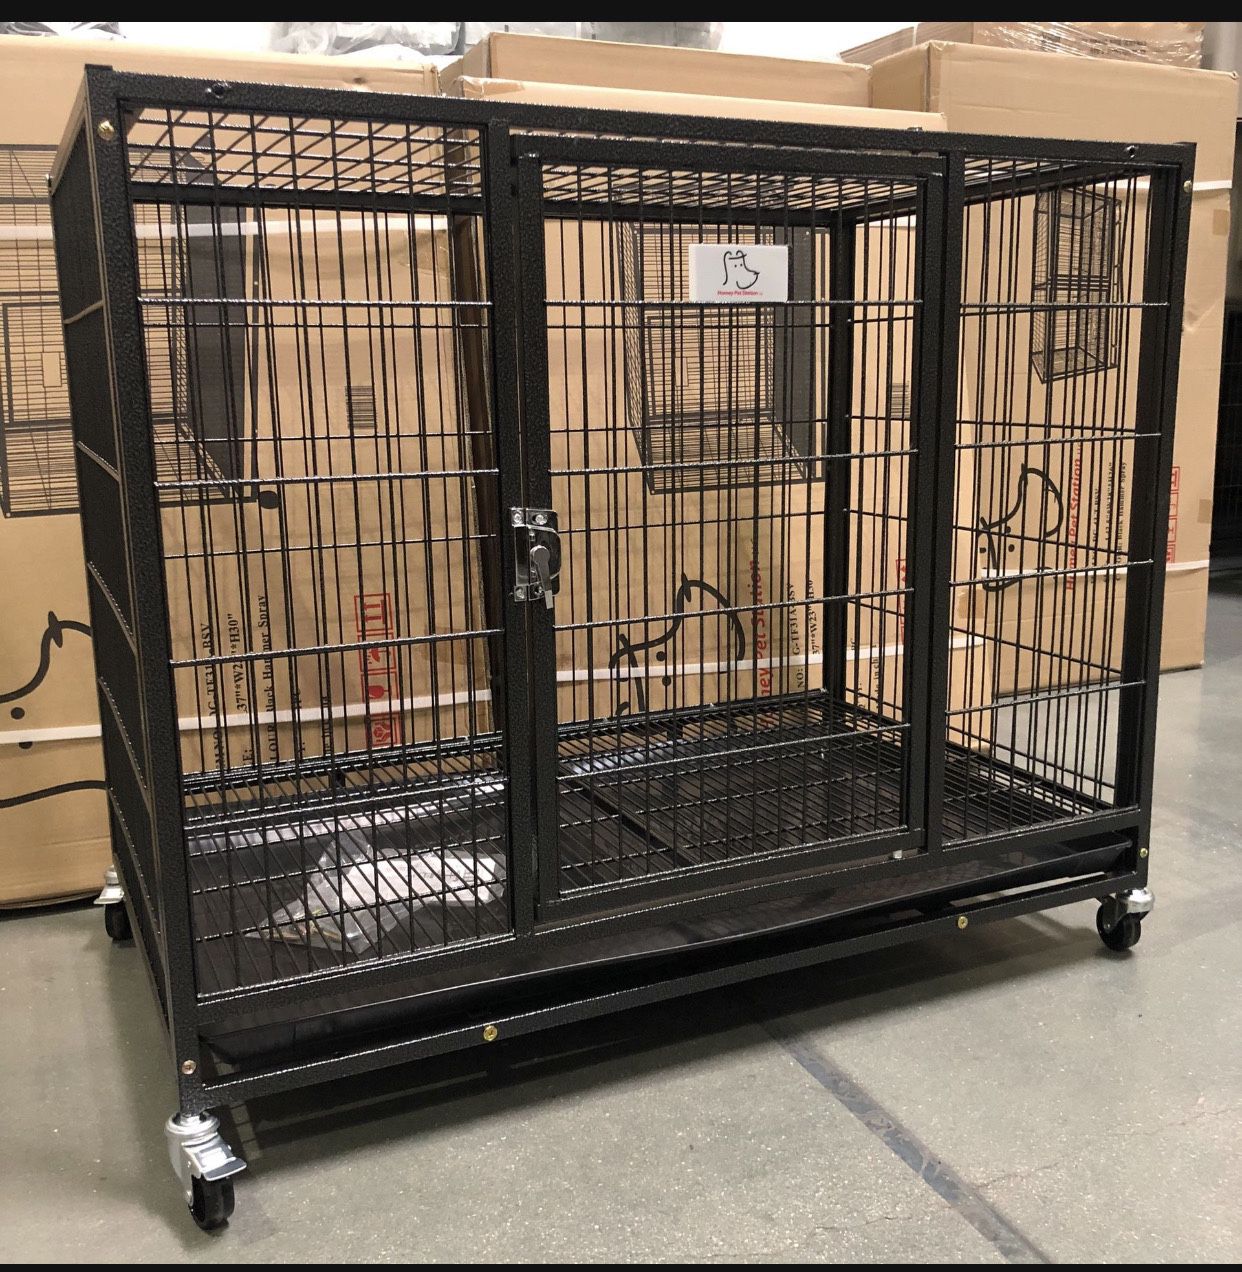 🔥 Brandnew 37” Heavy Duty Dog Kennel Crate Cage 🐶 please see dimensions in second picture 🇺🇸 